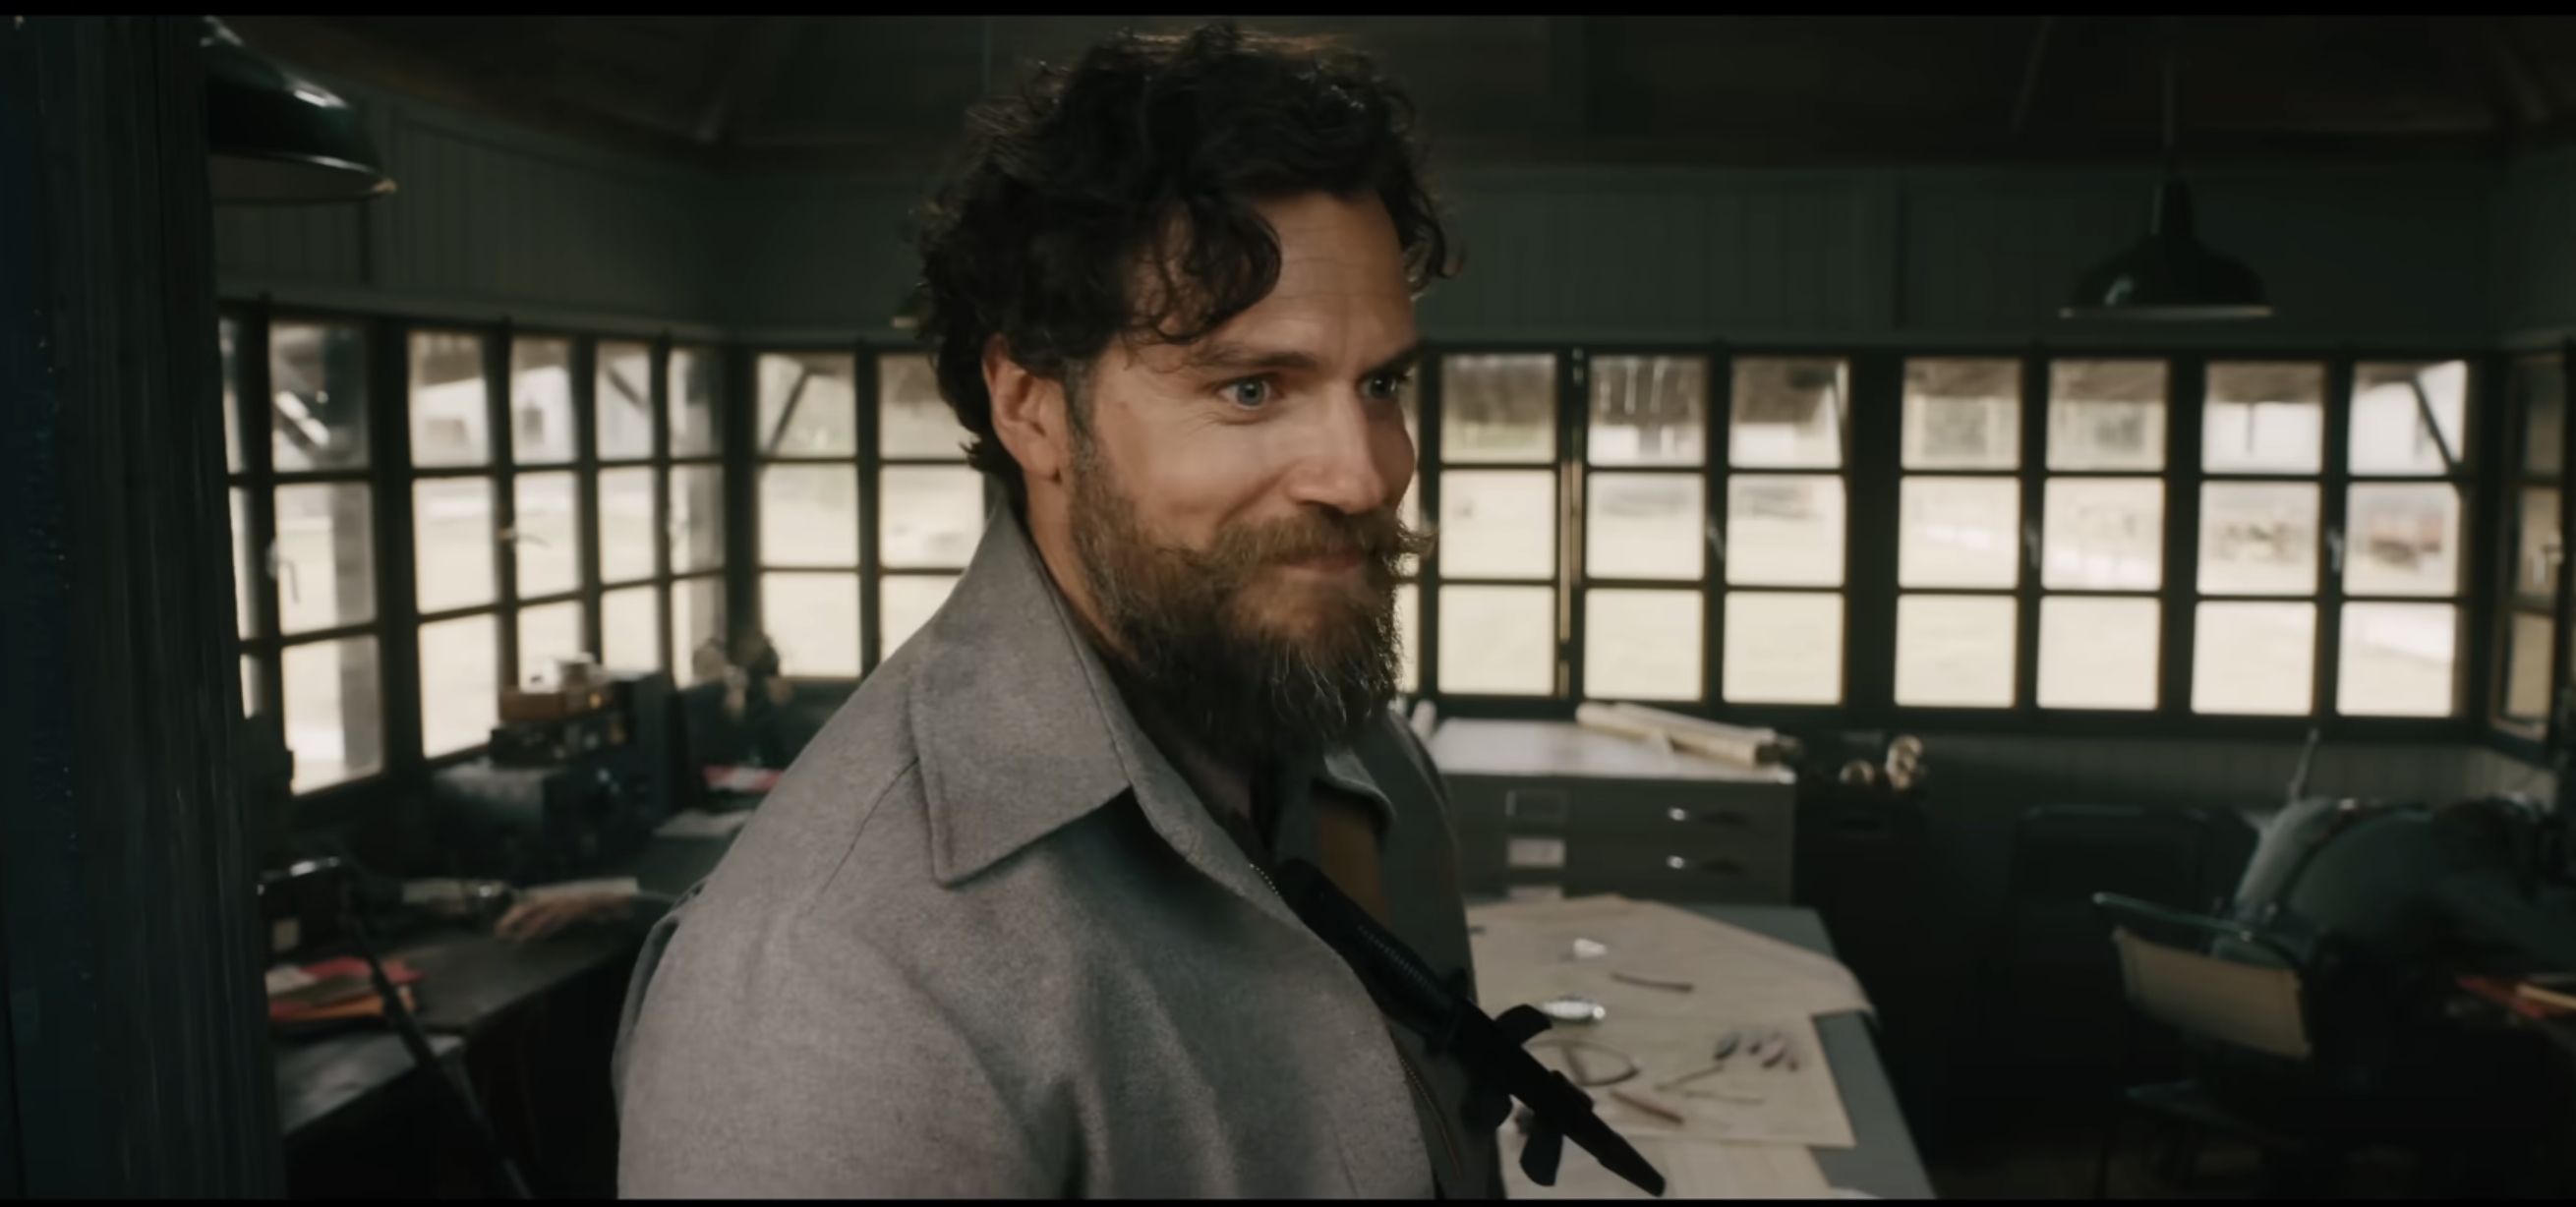 First Trailer Drops For Guy Ritchie’s Incredibly Violent Nazi Film Starring Henry Cavill